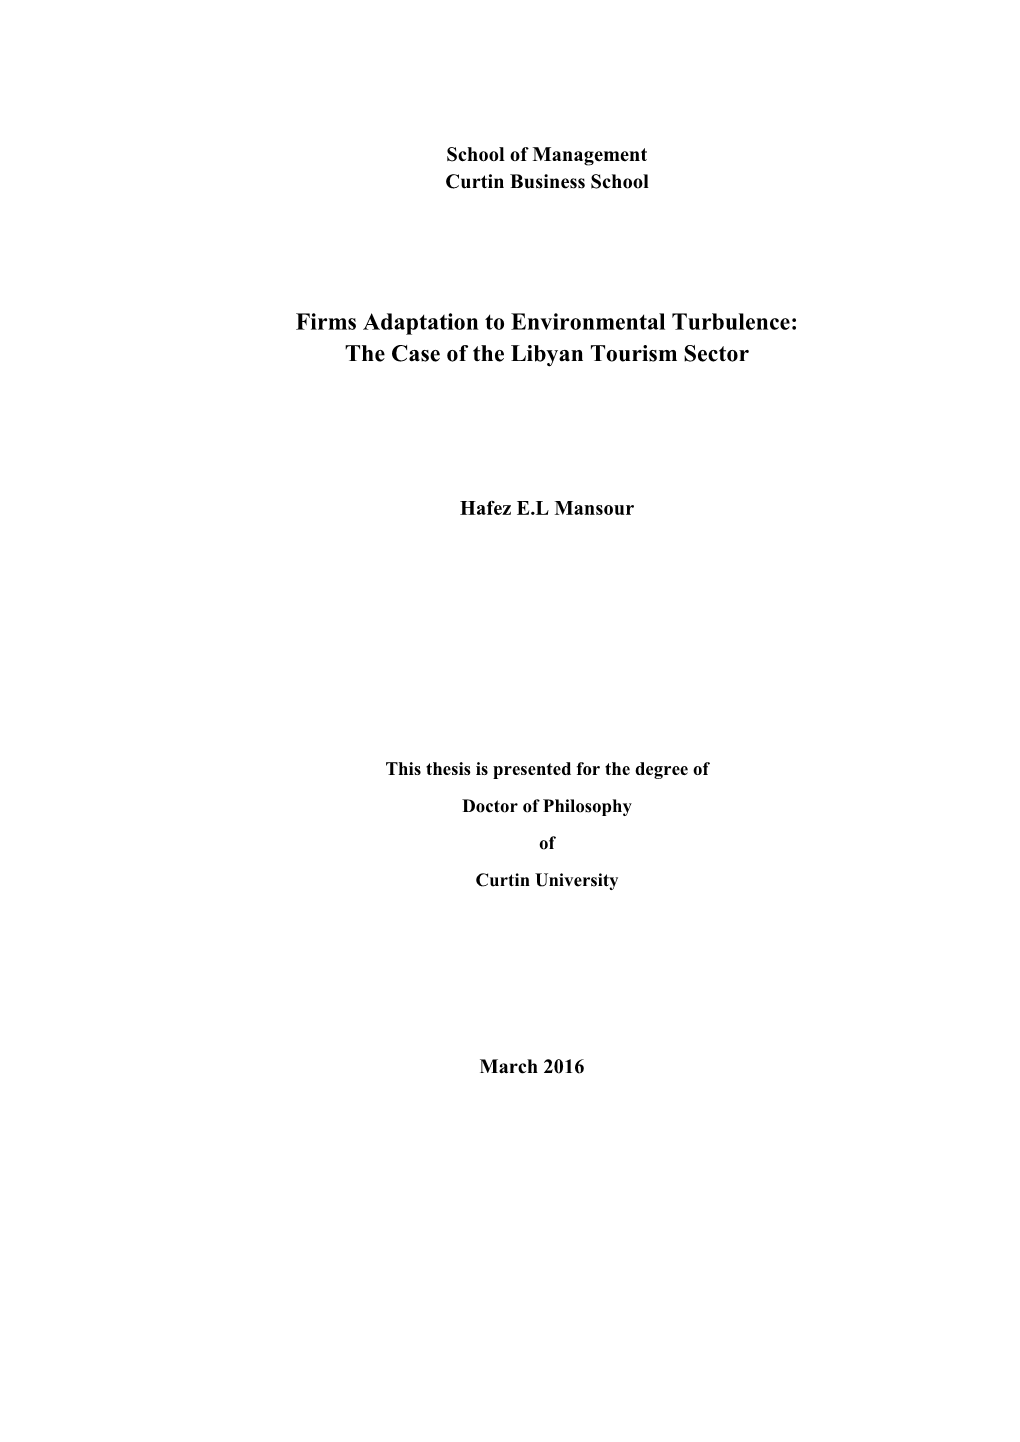 Firms Adaptation to Environmental Turbulence: the Case of the Libyan Tourism Sector